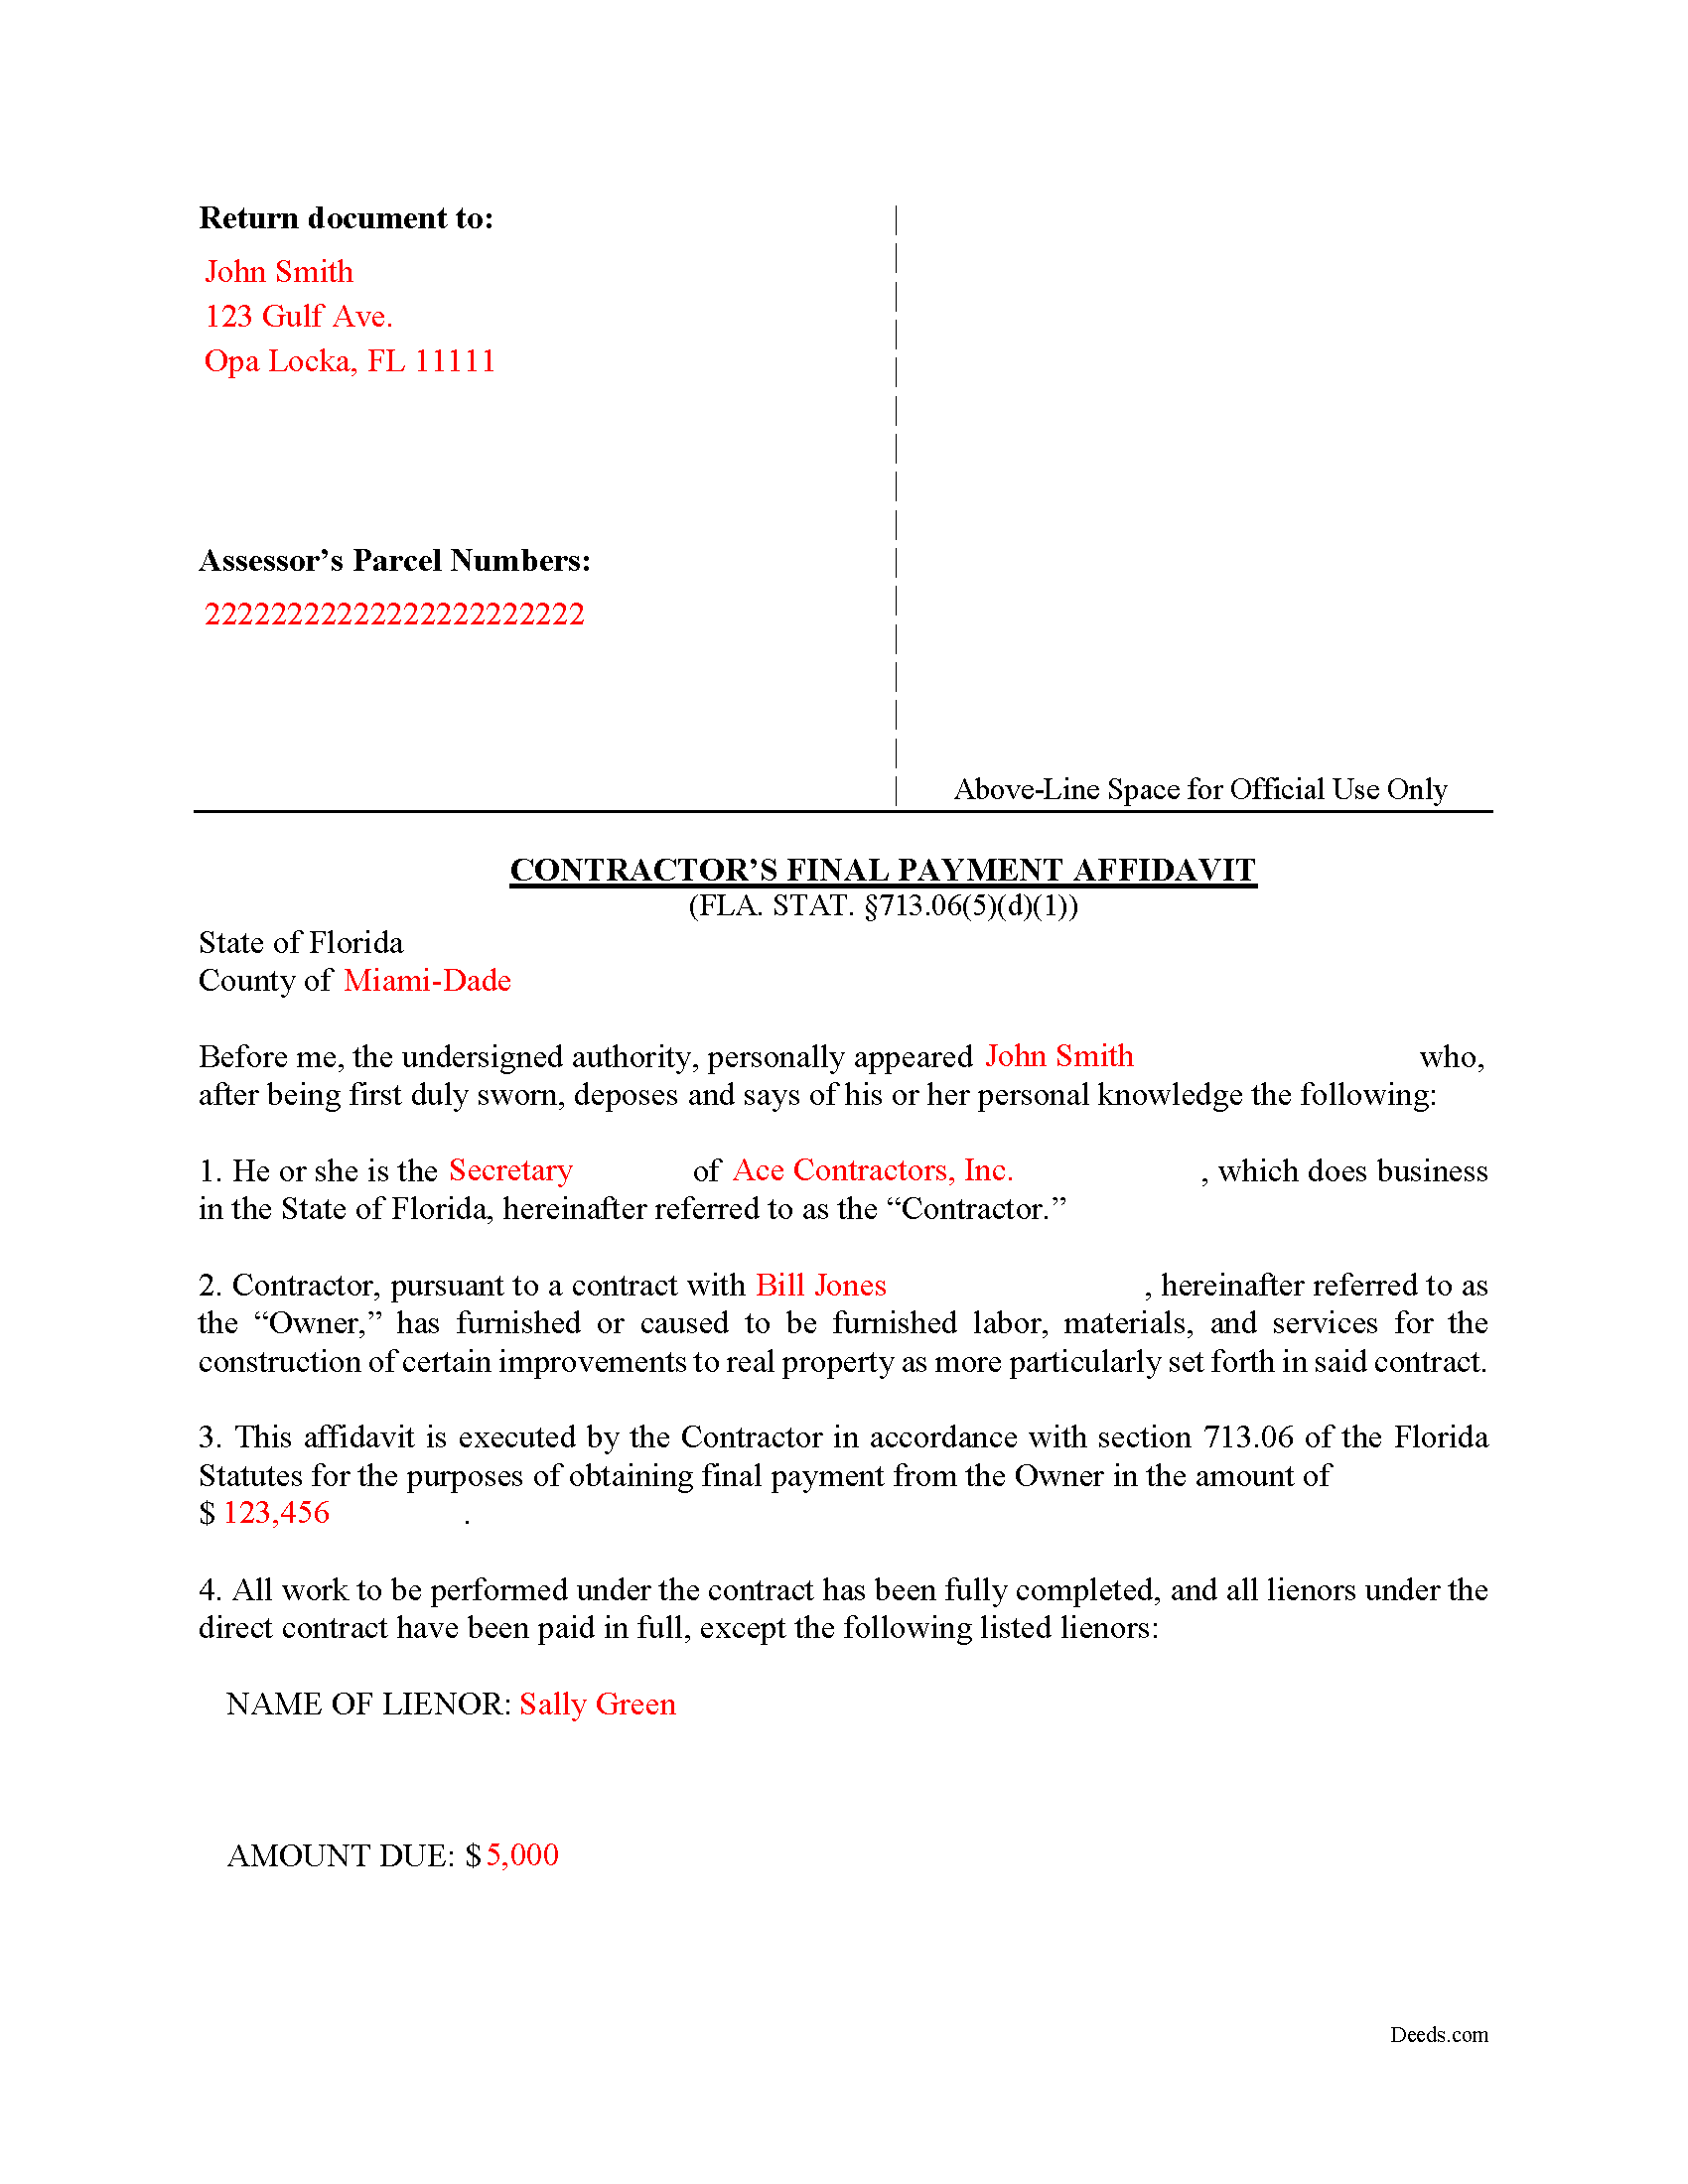 Completed Example of the Final Payment Affidavit